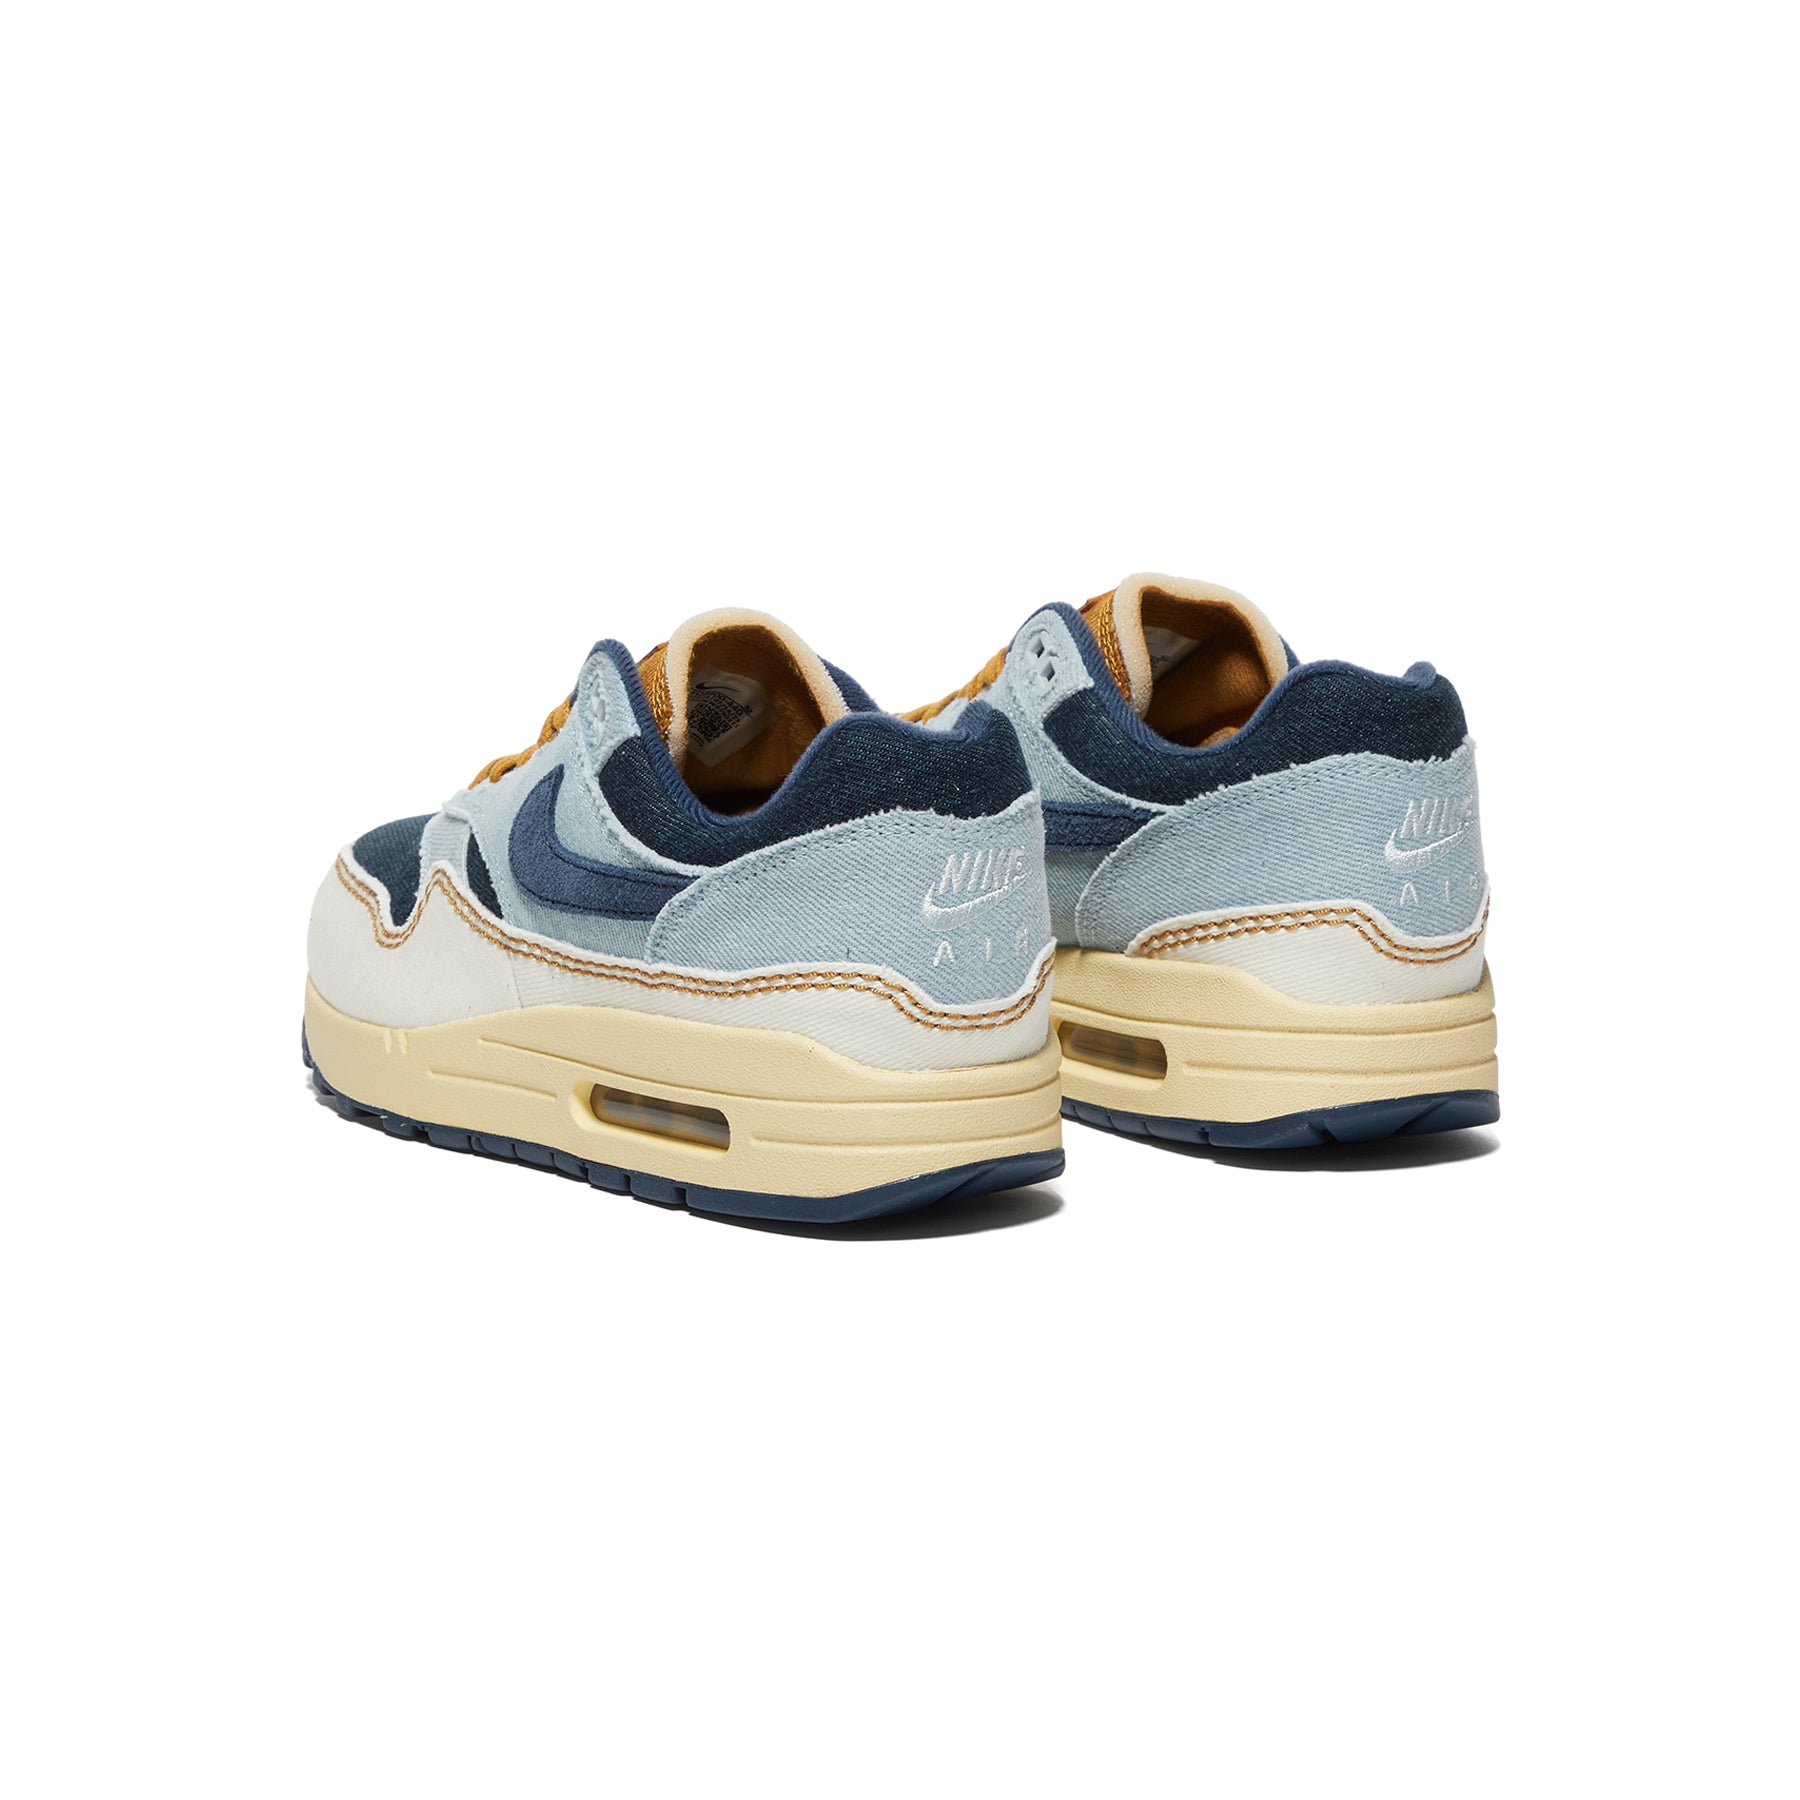 Nike Womens Air Max 1 Navy/Pale Ivory) – (Aura/Midnight Concepts \'87